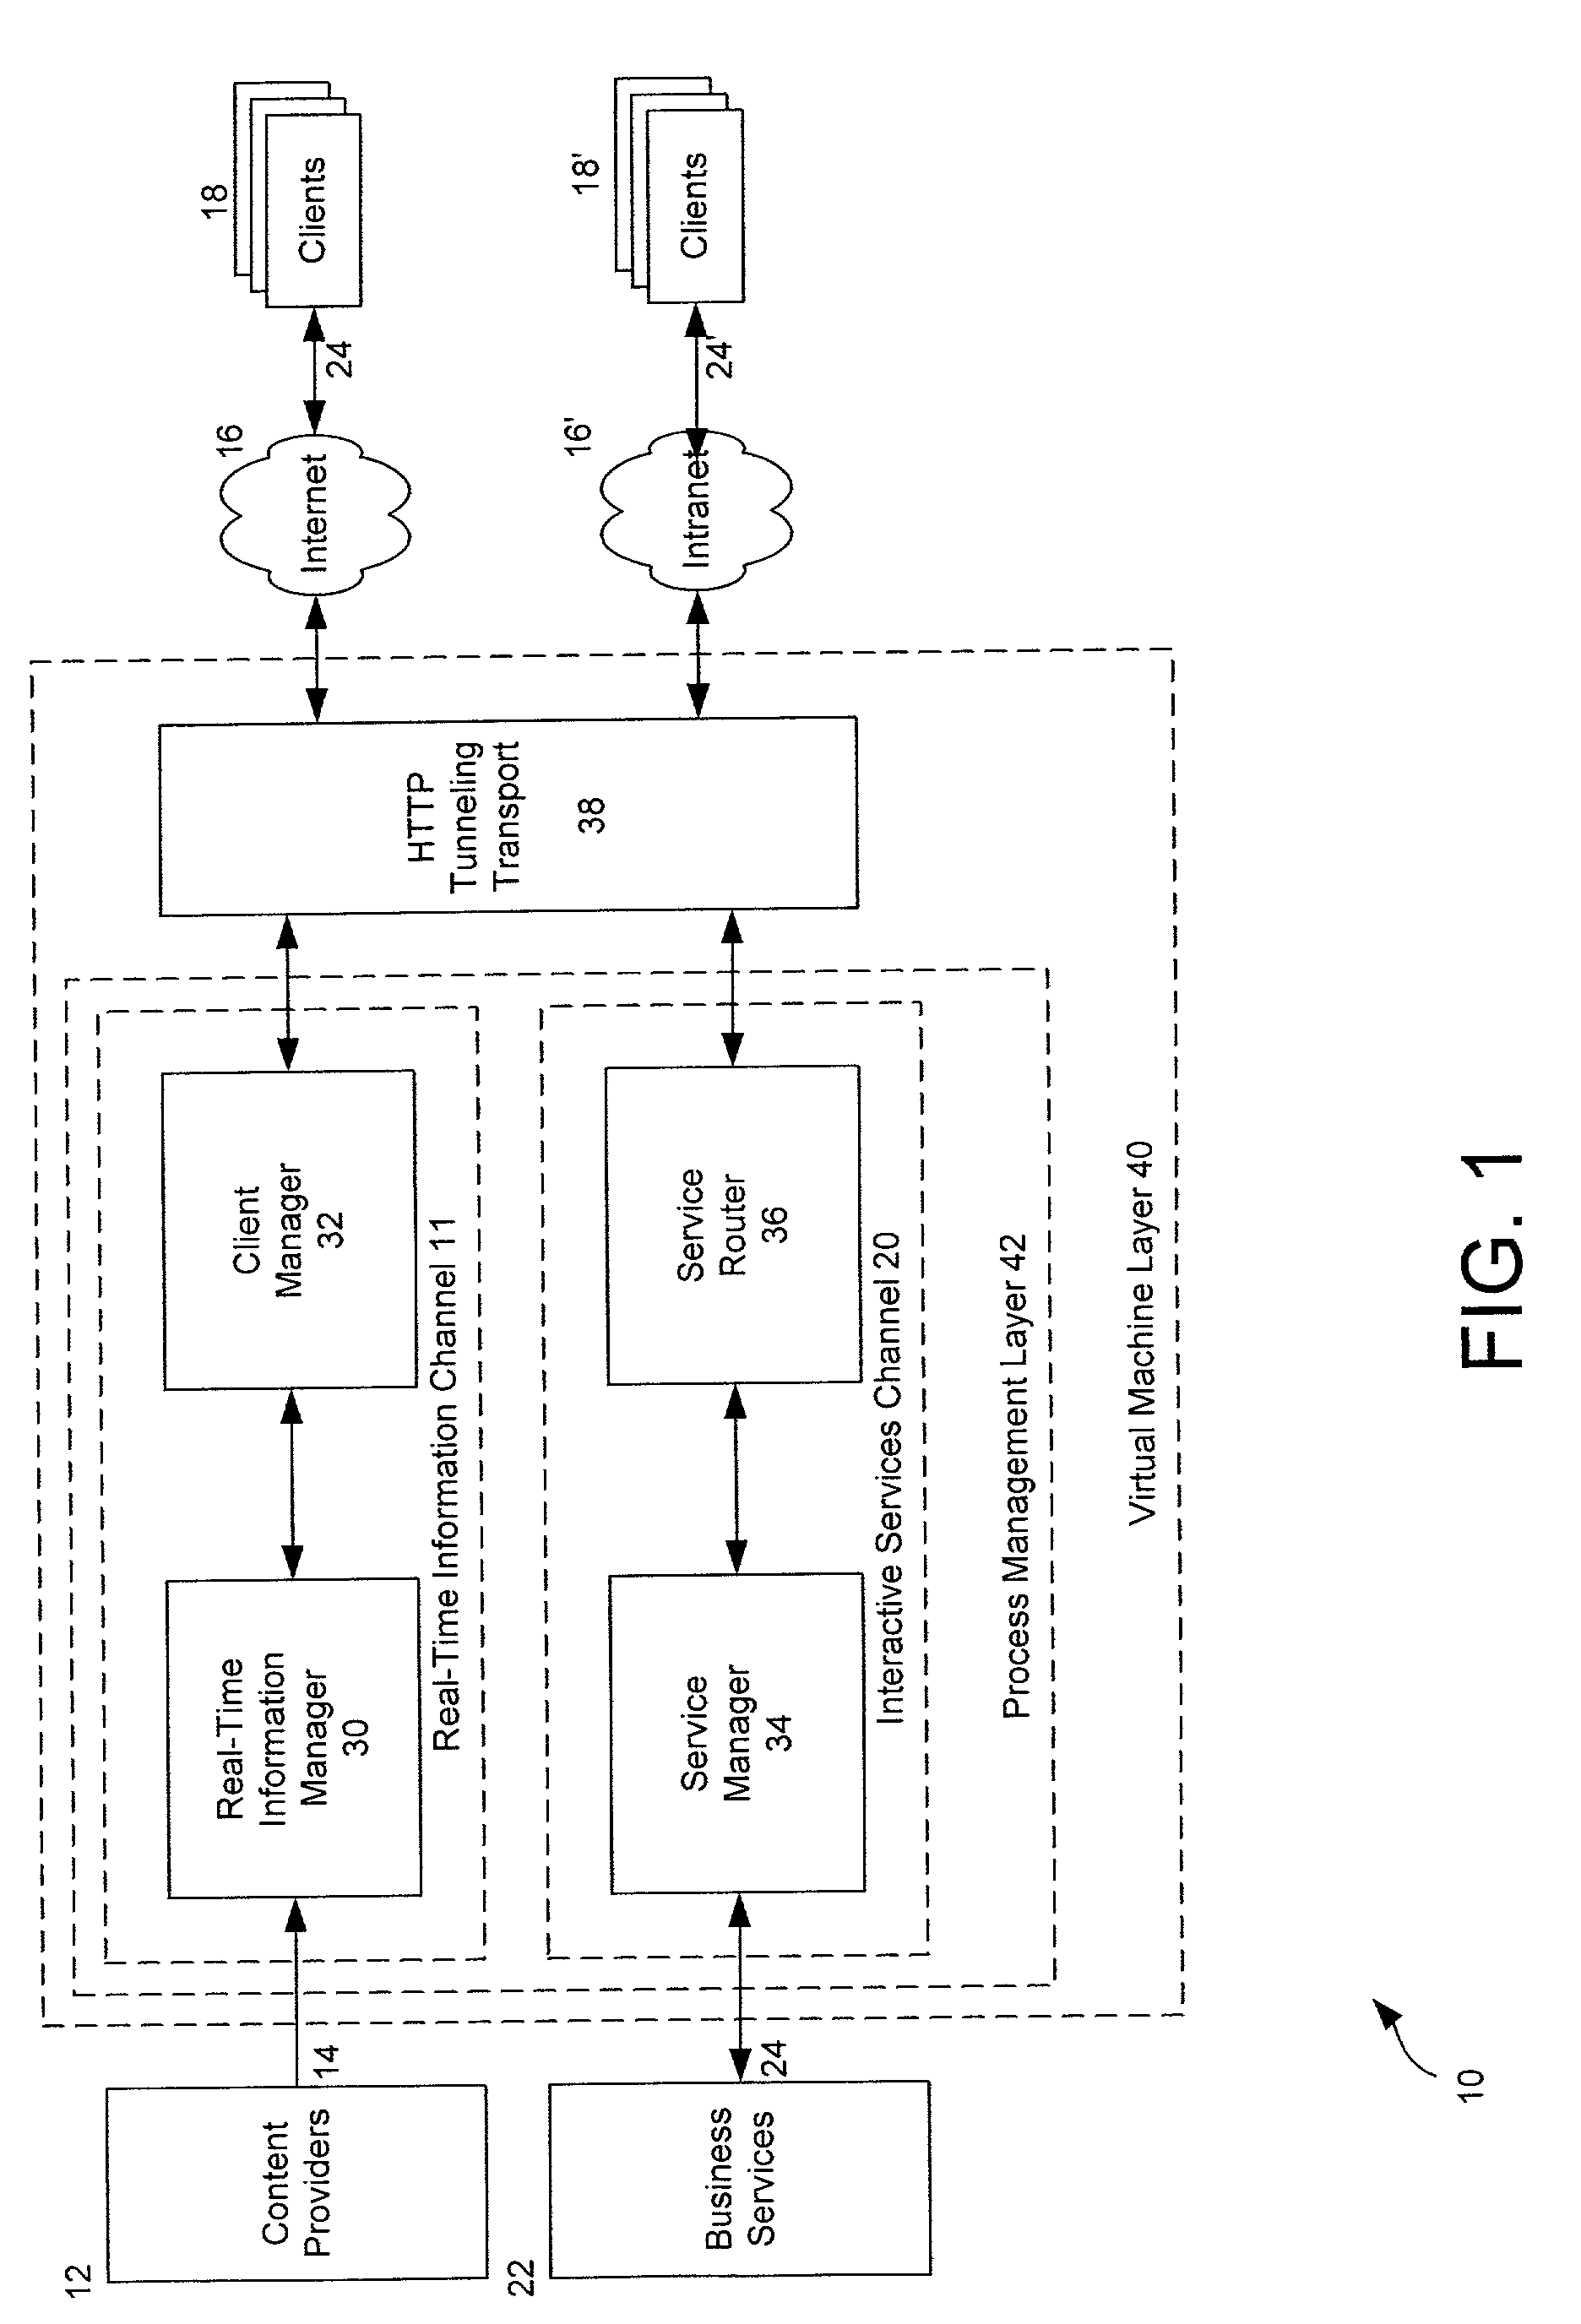 Method and system for processing financial data objects carried on broadcast data streams and delivering information to subscribing clients